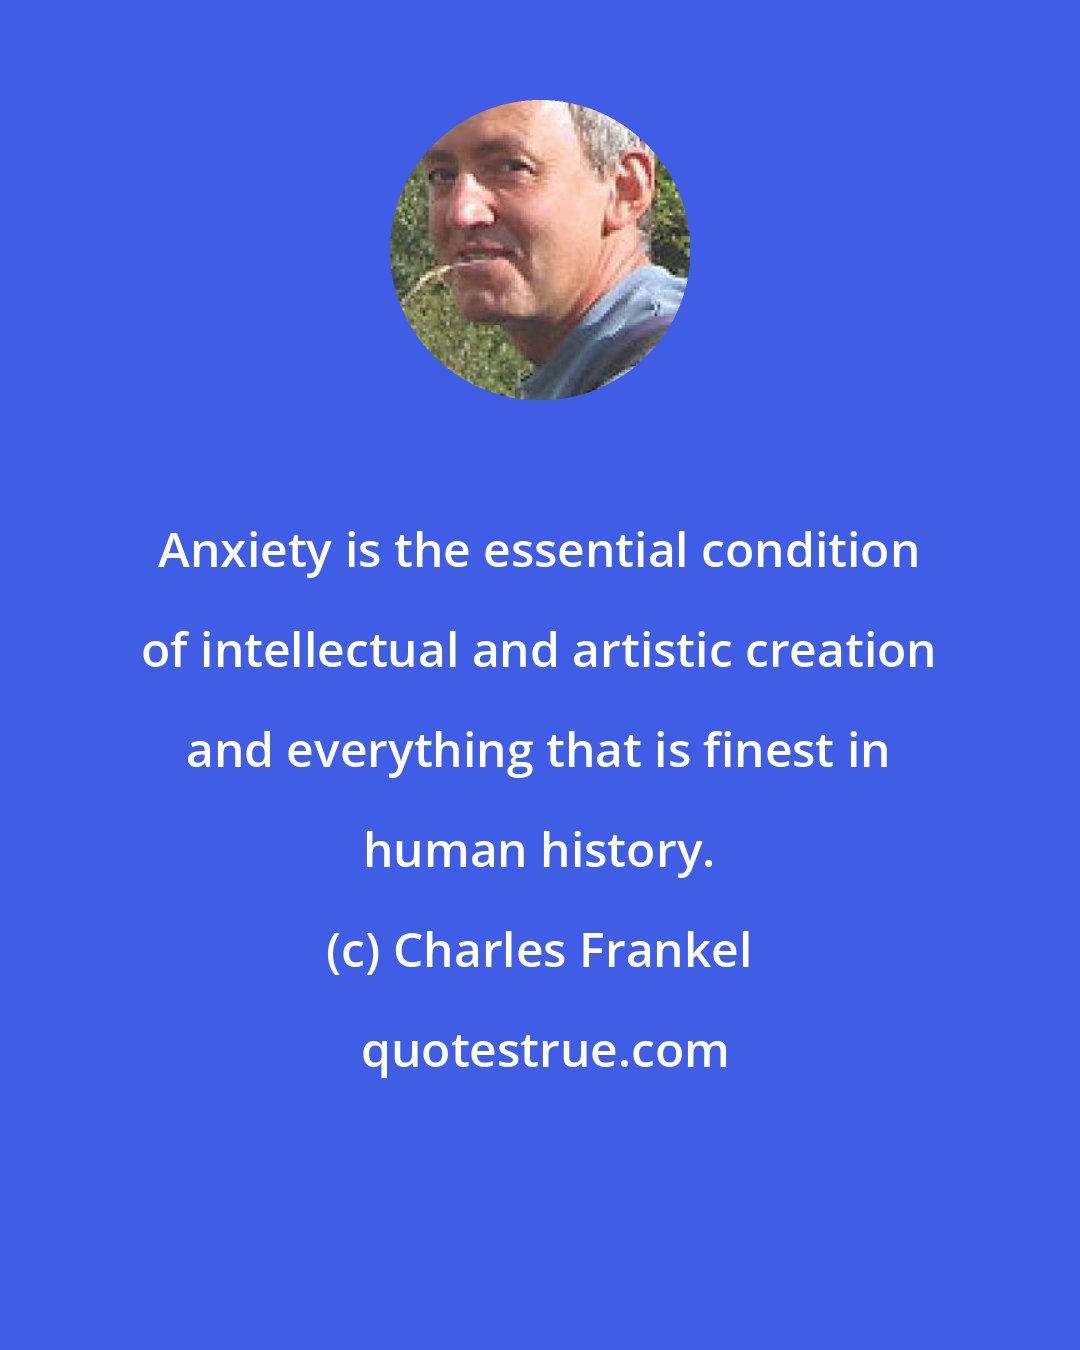 Charles Frankel: Anxiety is the essential condition of intellectual and artistic creation and everything that is finest in human history.